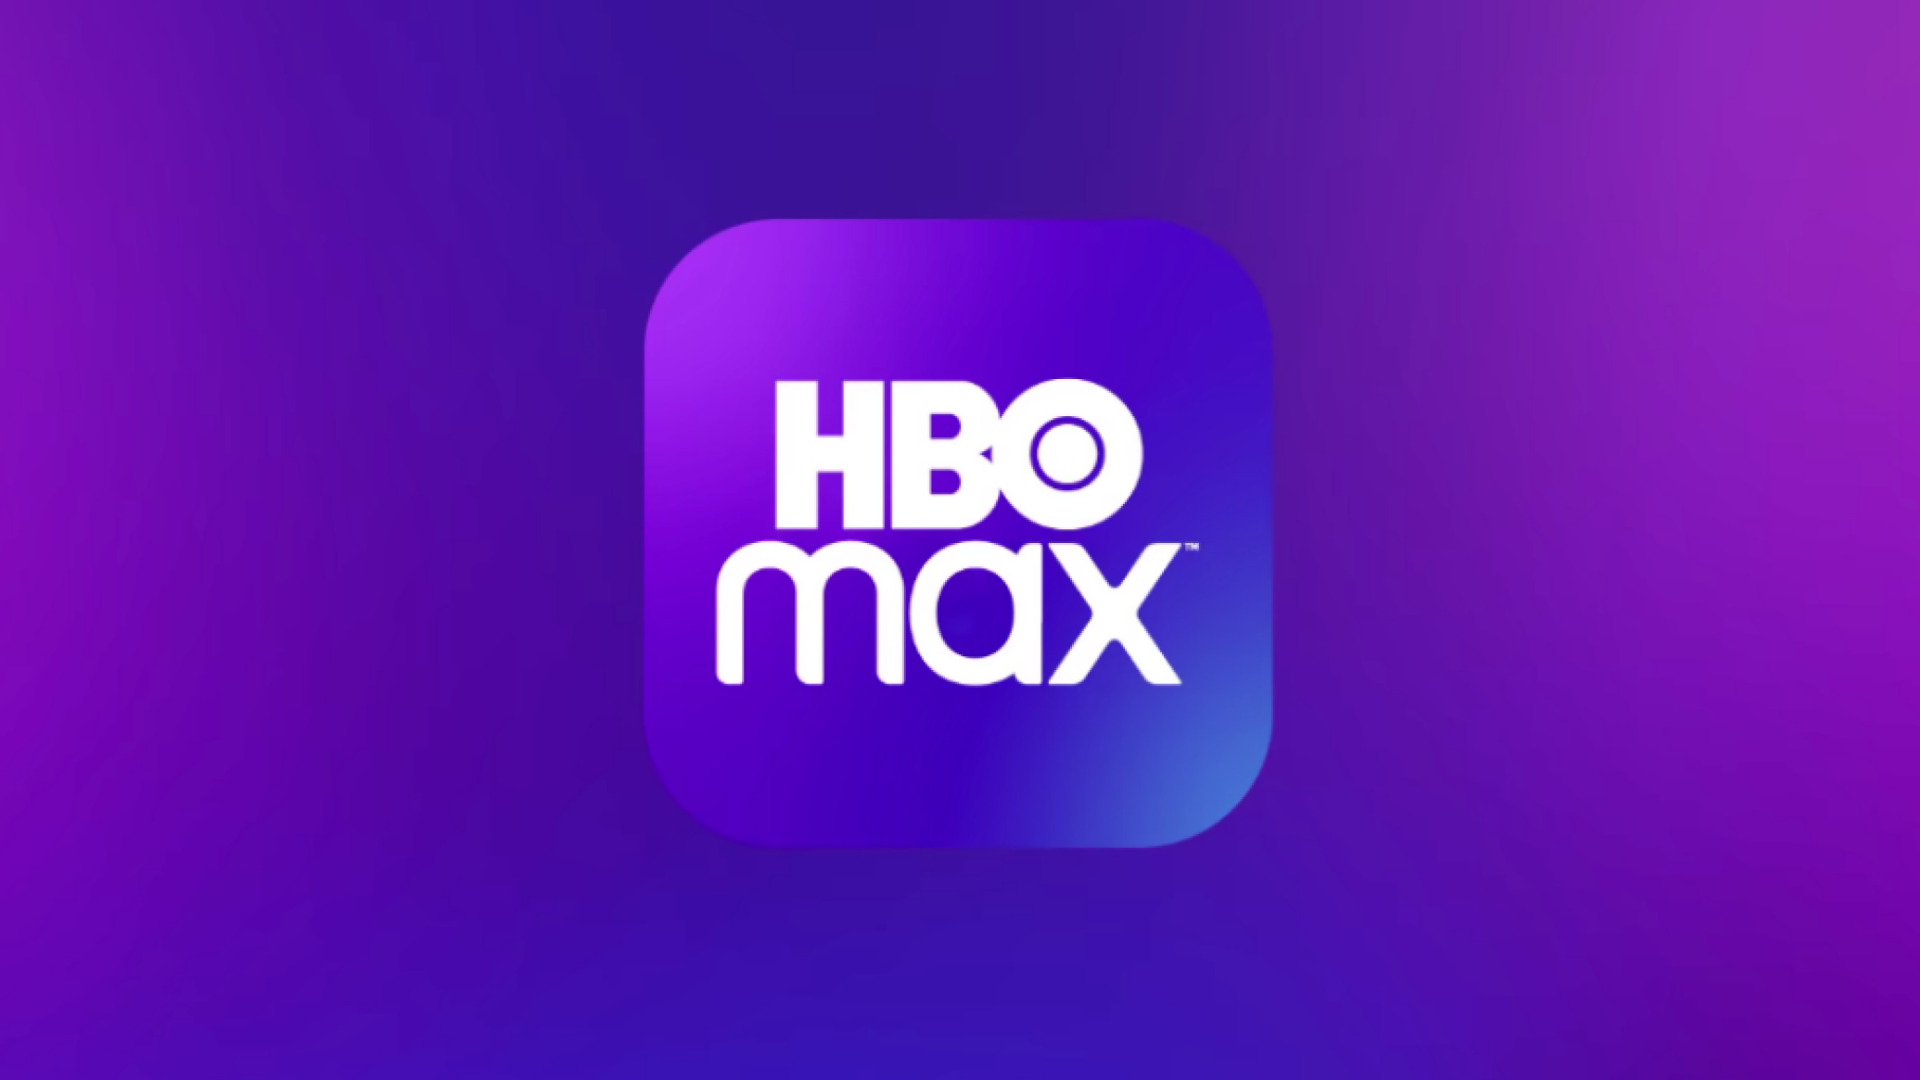 HBO Max launches today, Fifth of UK households signed up to streaming services during lockdown and other top news